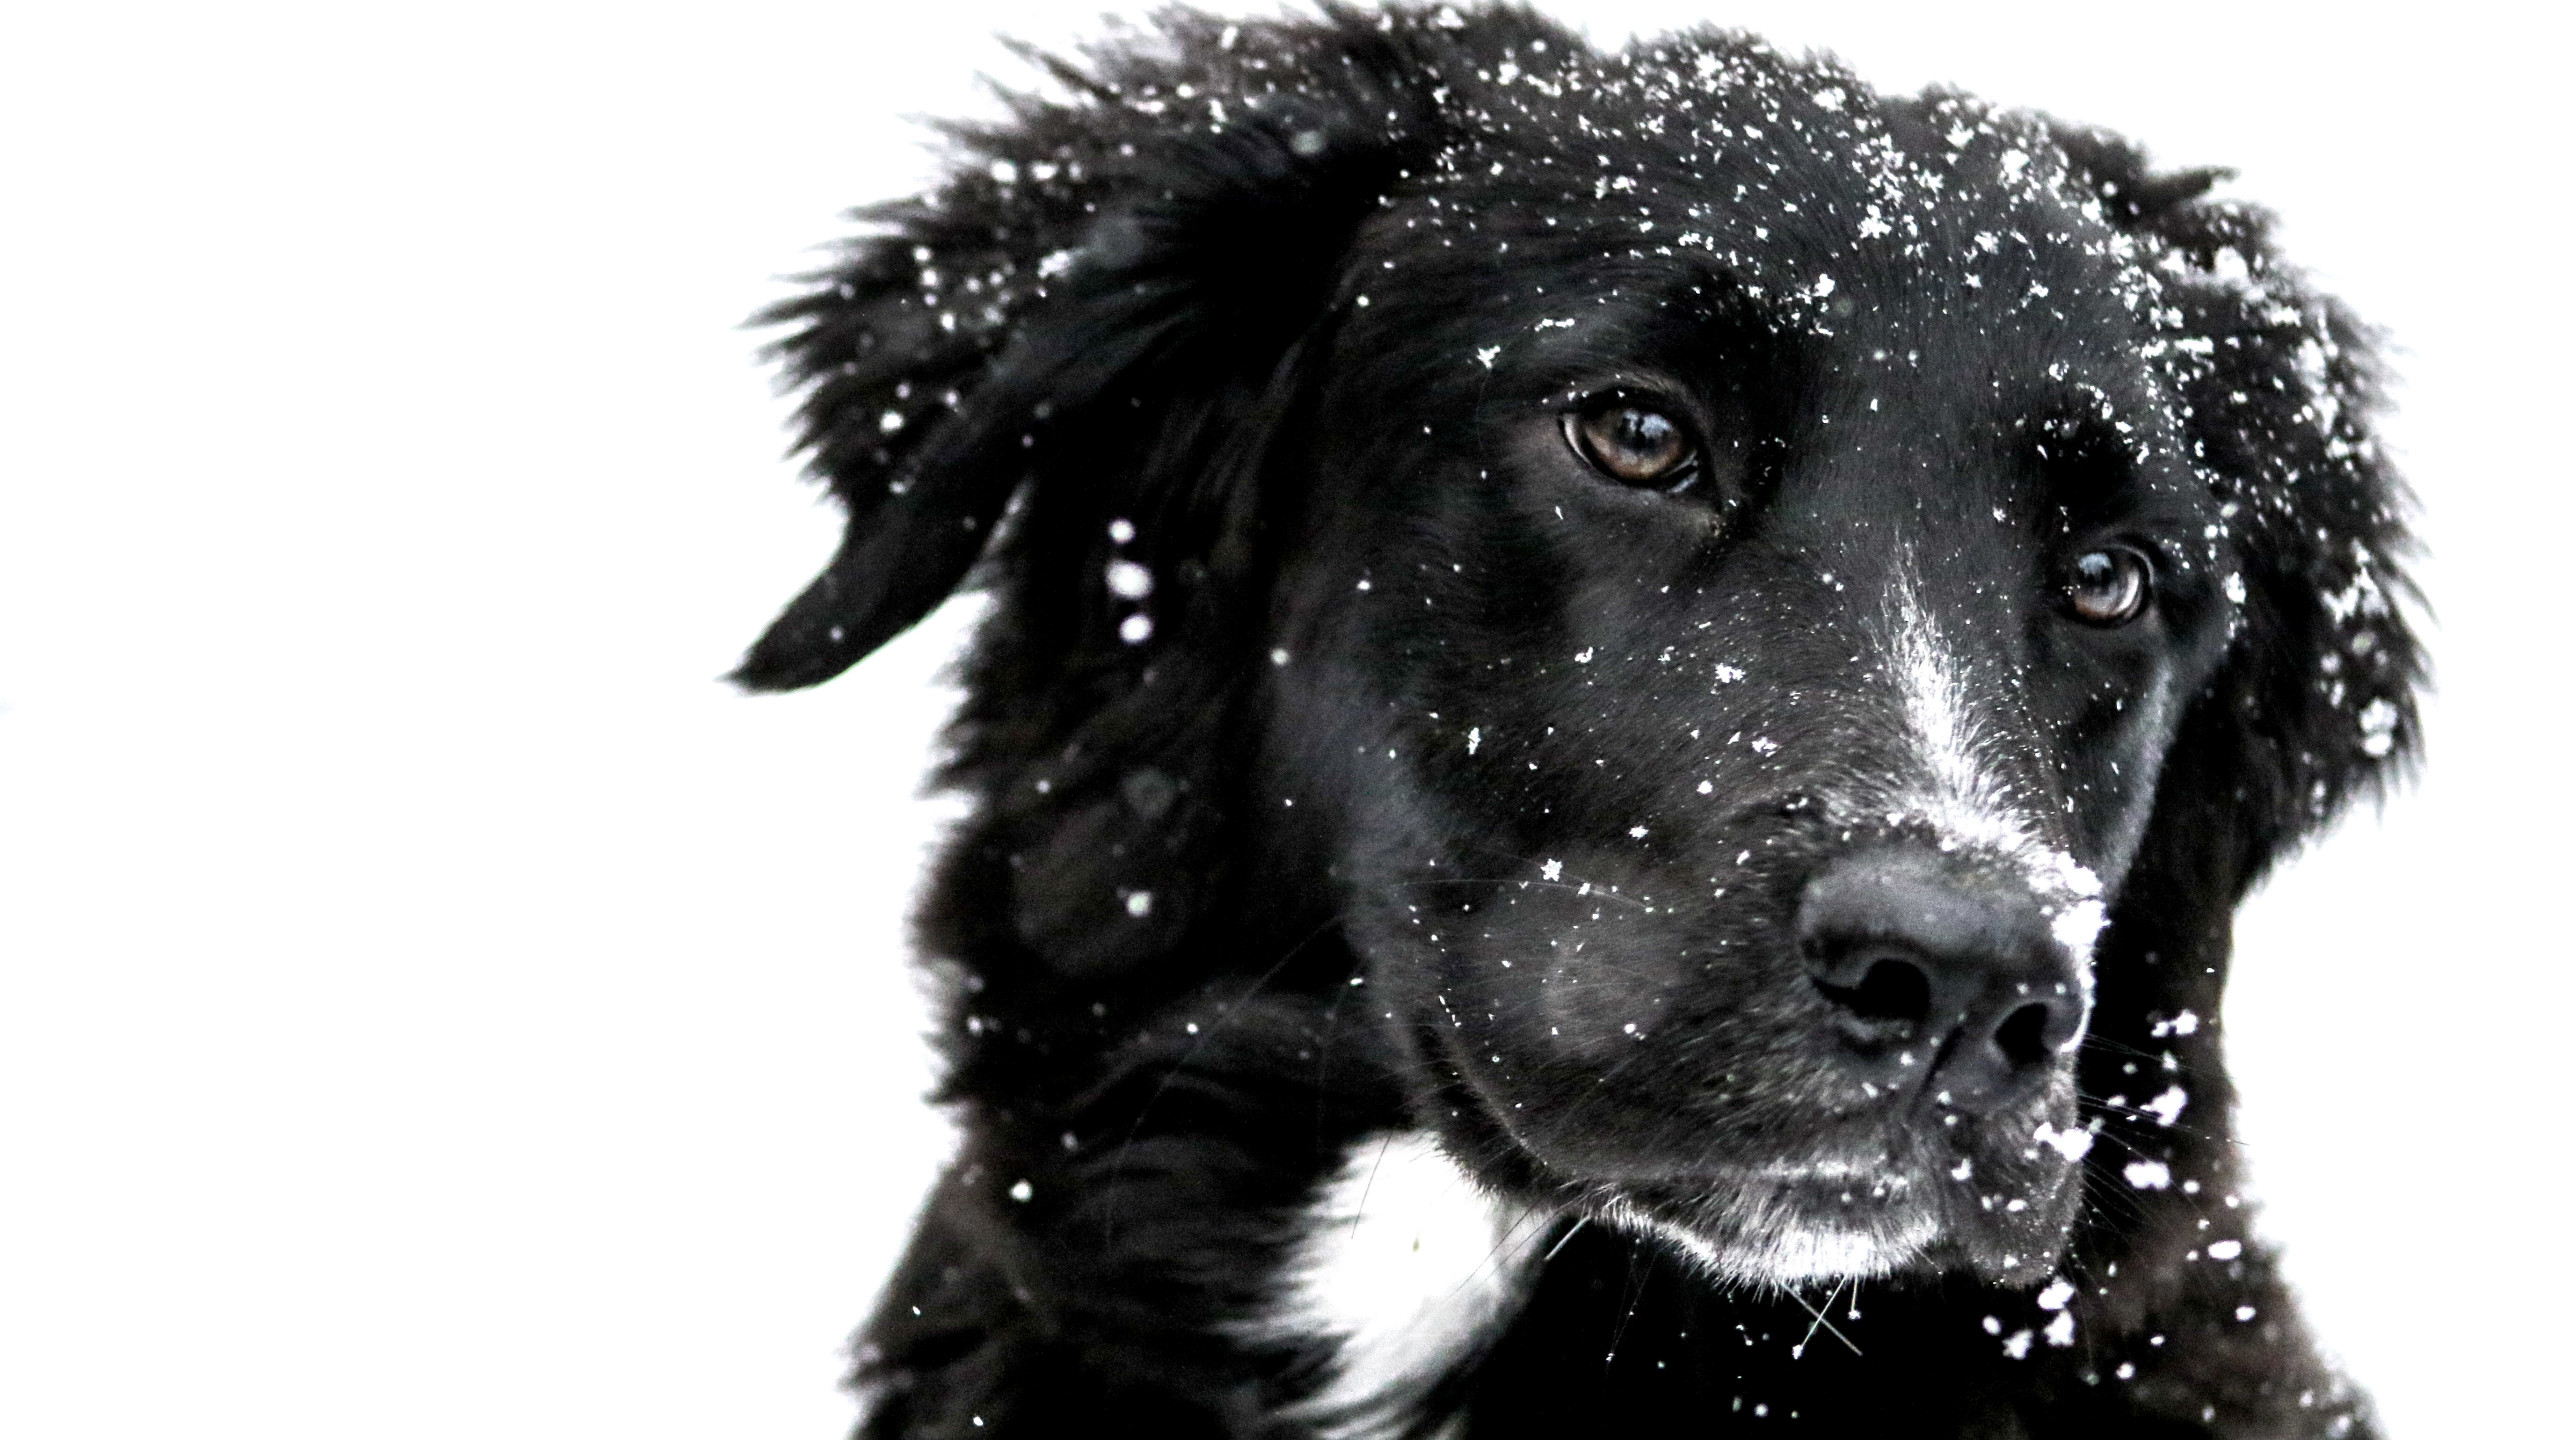 Snowing over the cute dog wallpaper 2560x1440